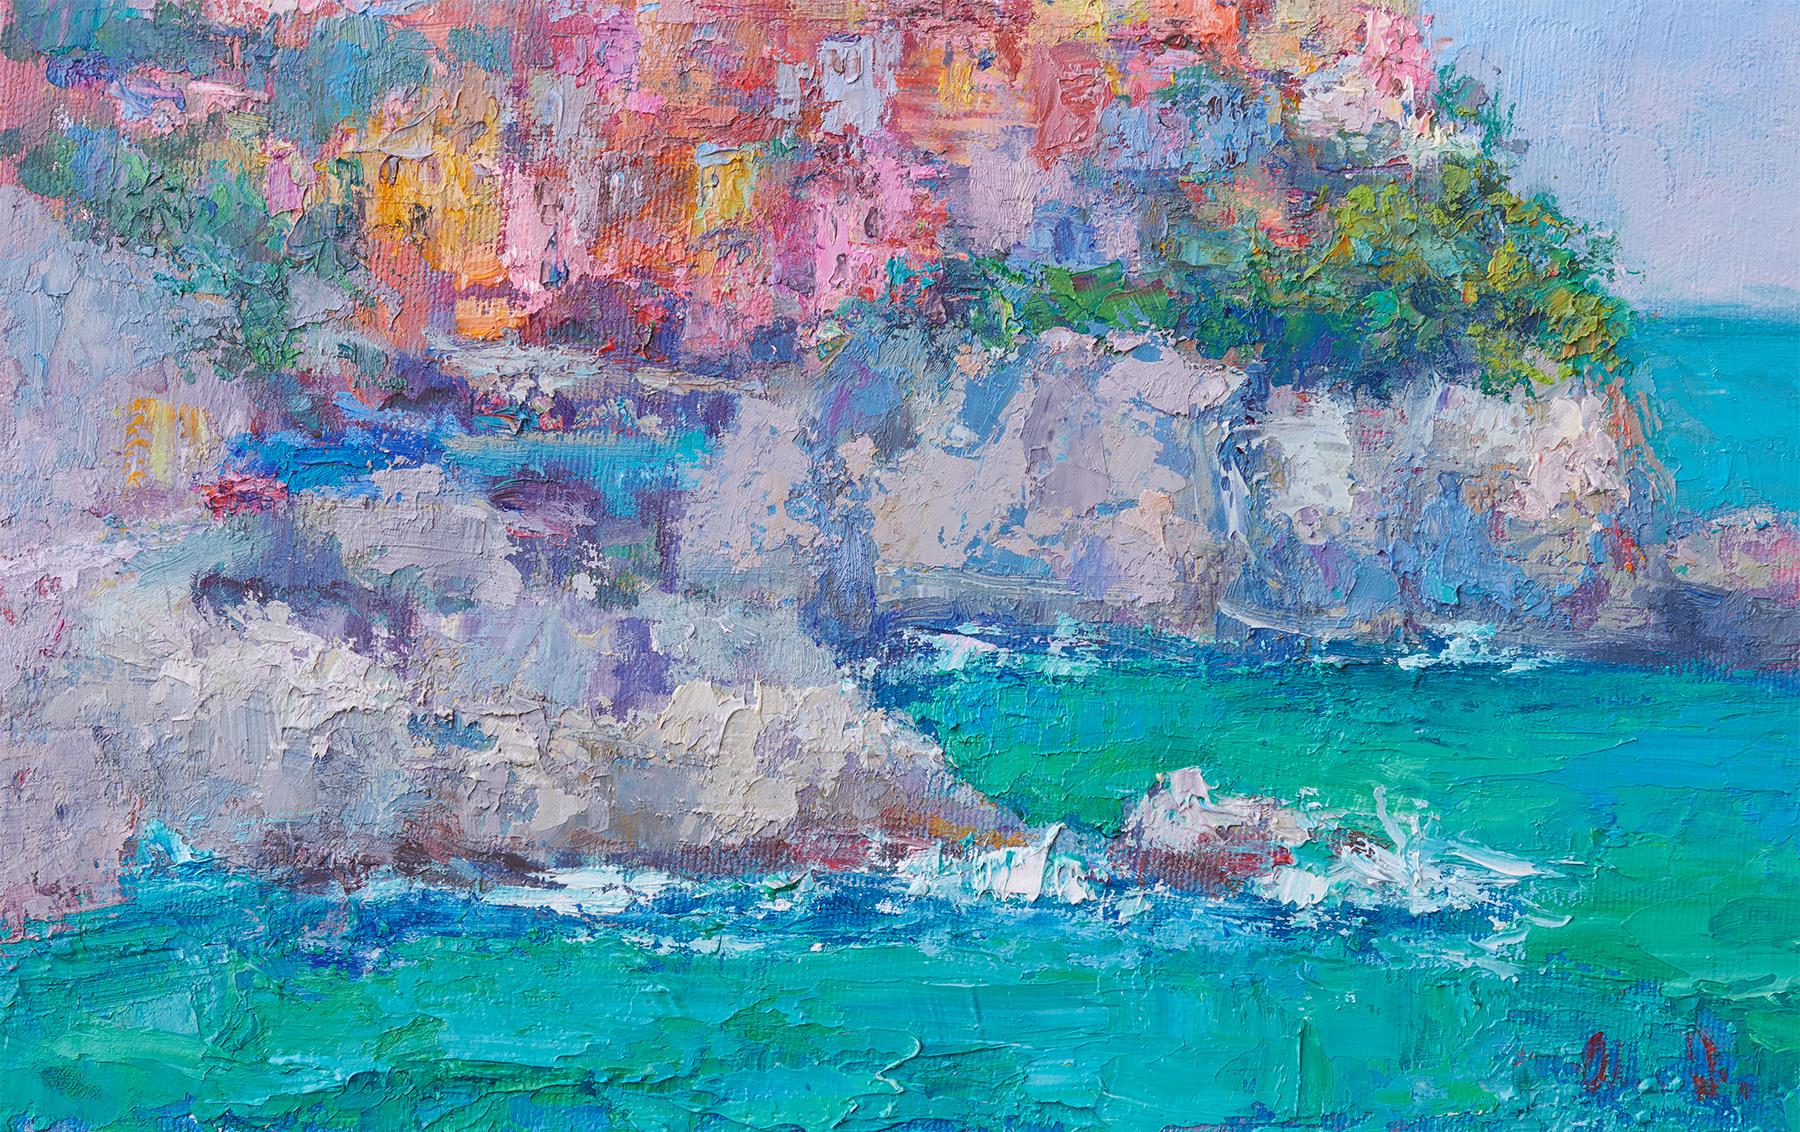 The Village by the Sea, Oil Painting - Blue Landscape Painting by Oksana Johnson